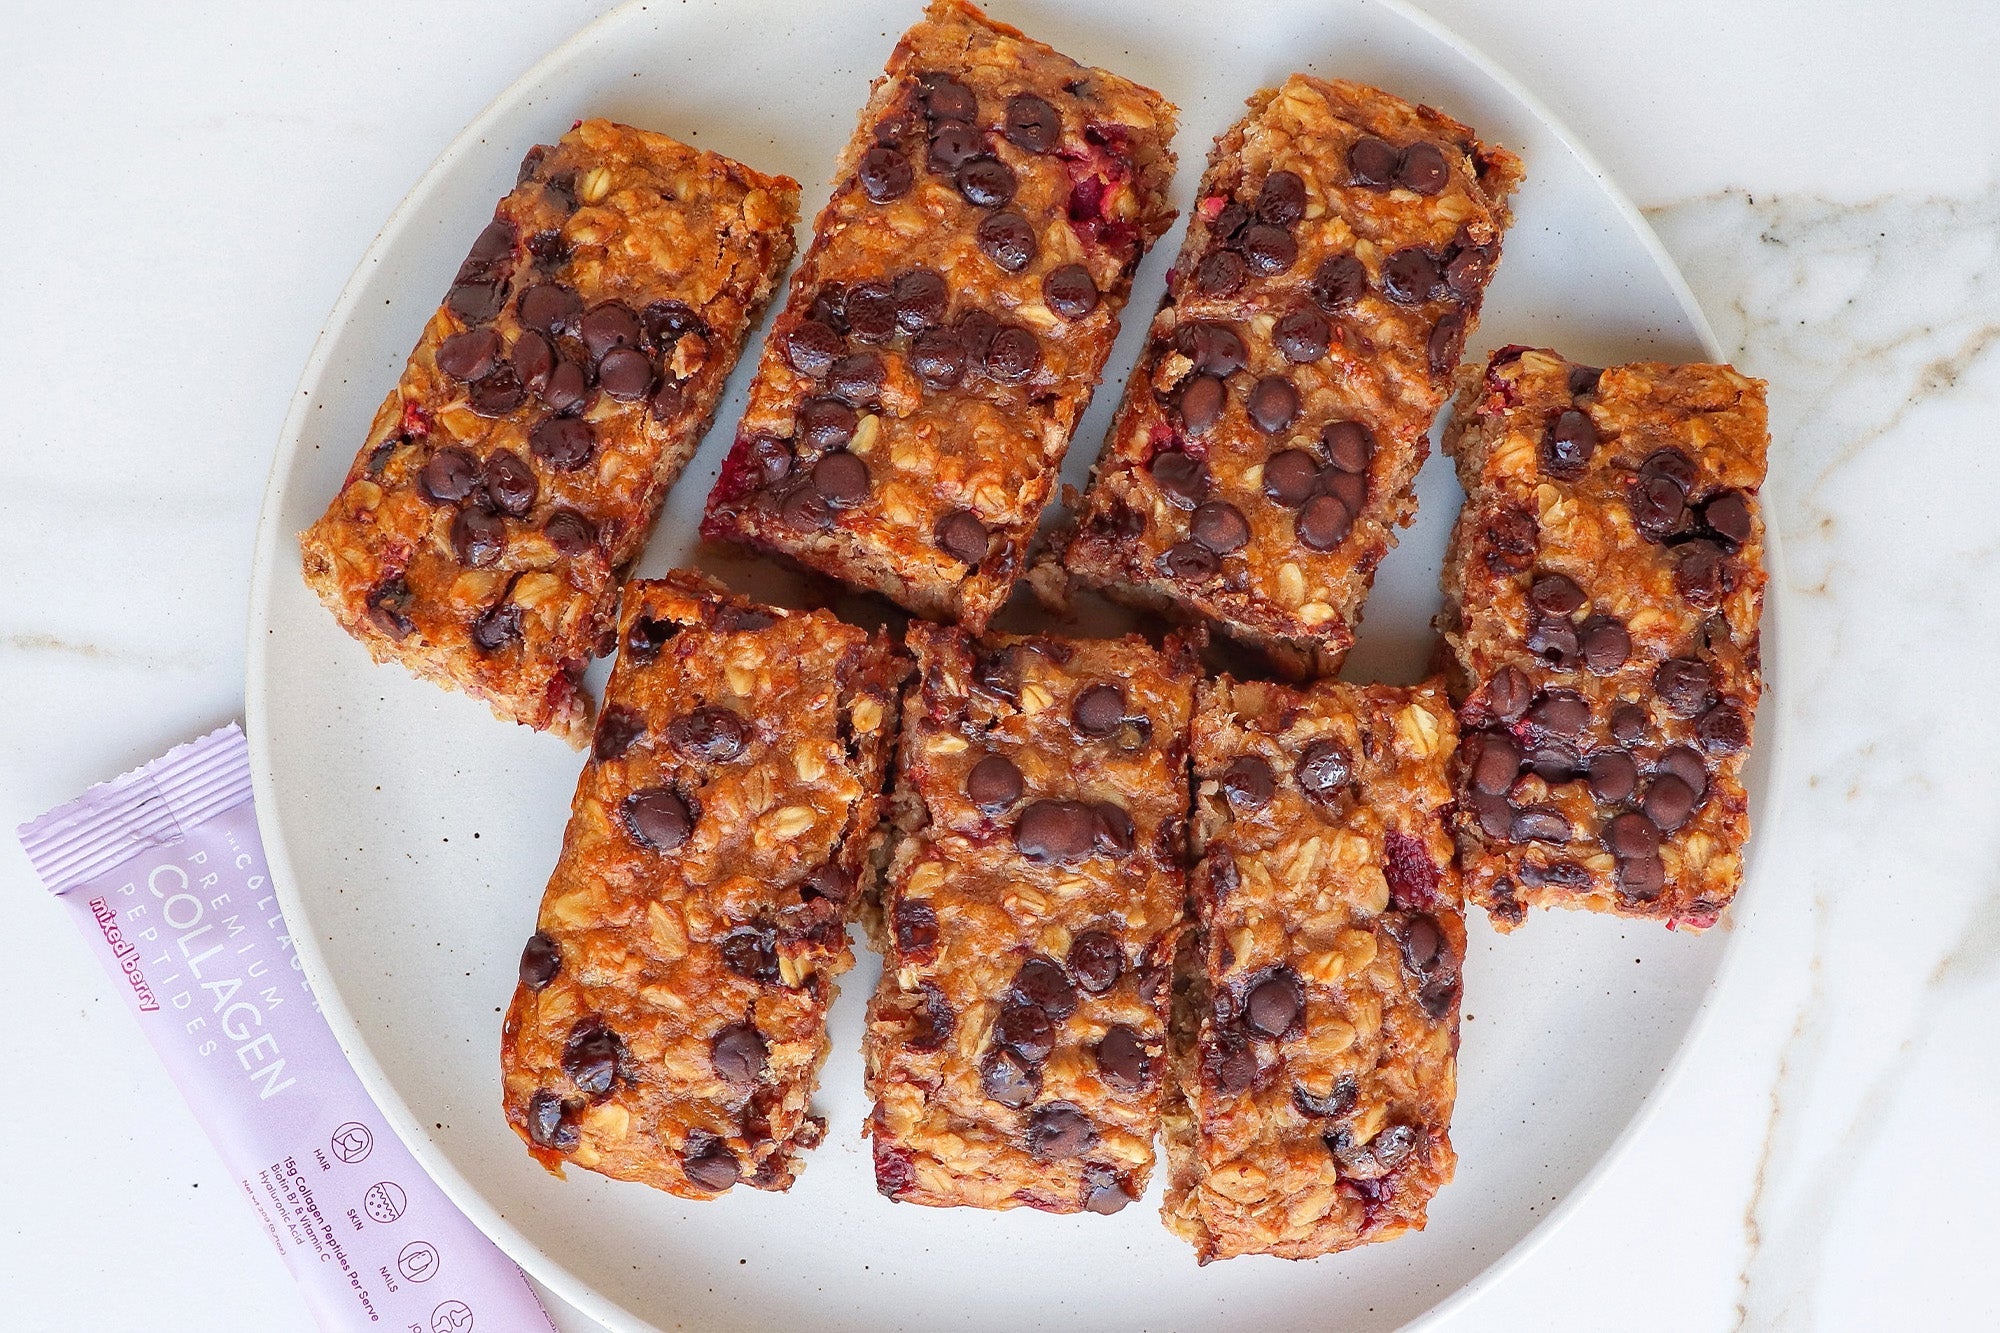 Raspberry Chocolate Chip Oatmeal Bars - The Collagen Co.